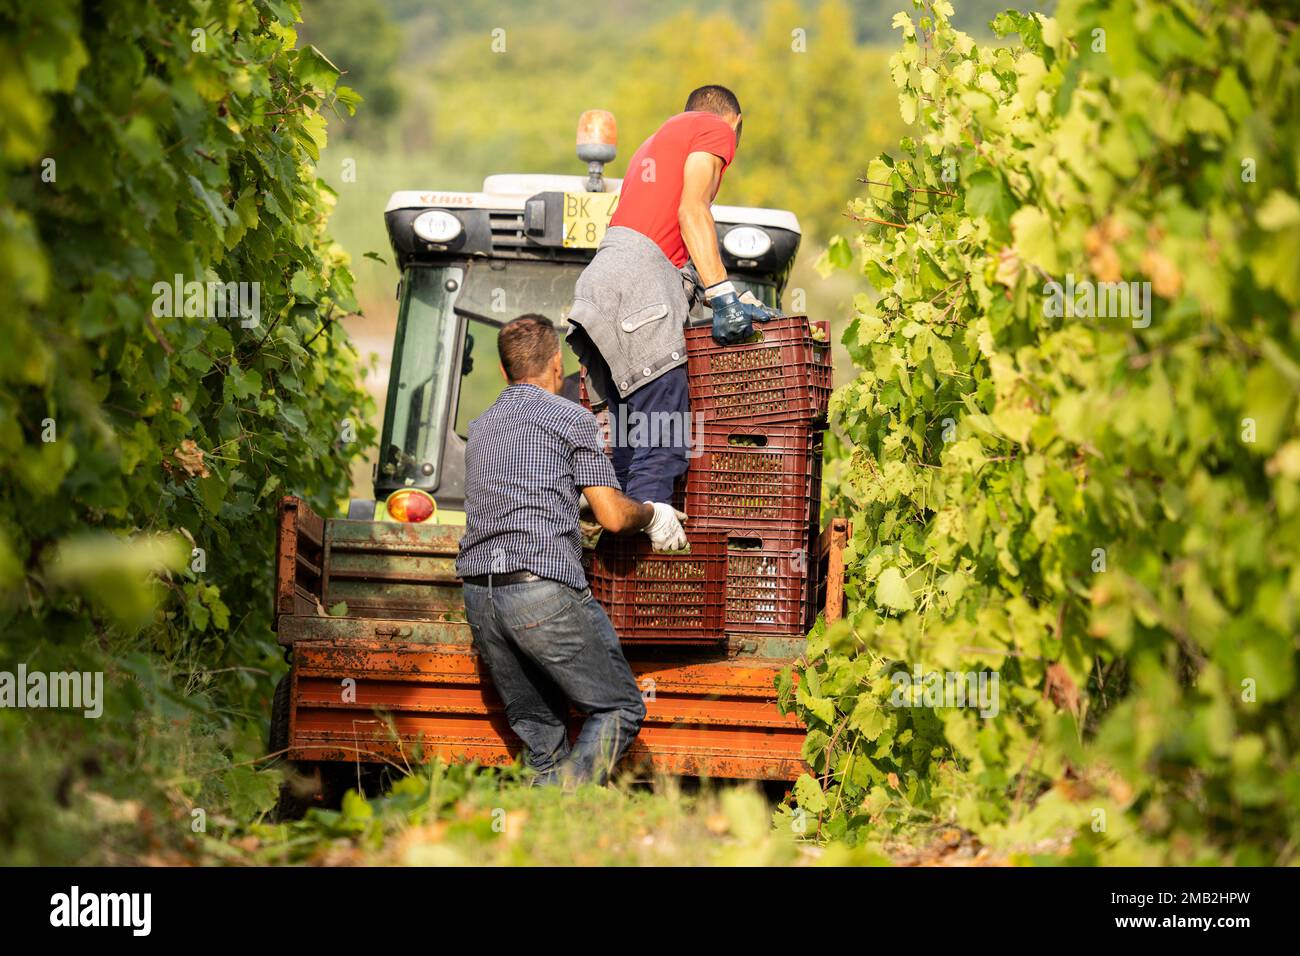 Italy, Campania, Benevento - Grape harvest time in and around the small town of Ponte, few km away from Benevento, the main city in the area. This is Stock Photo